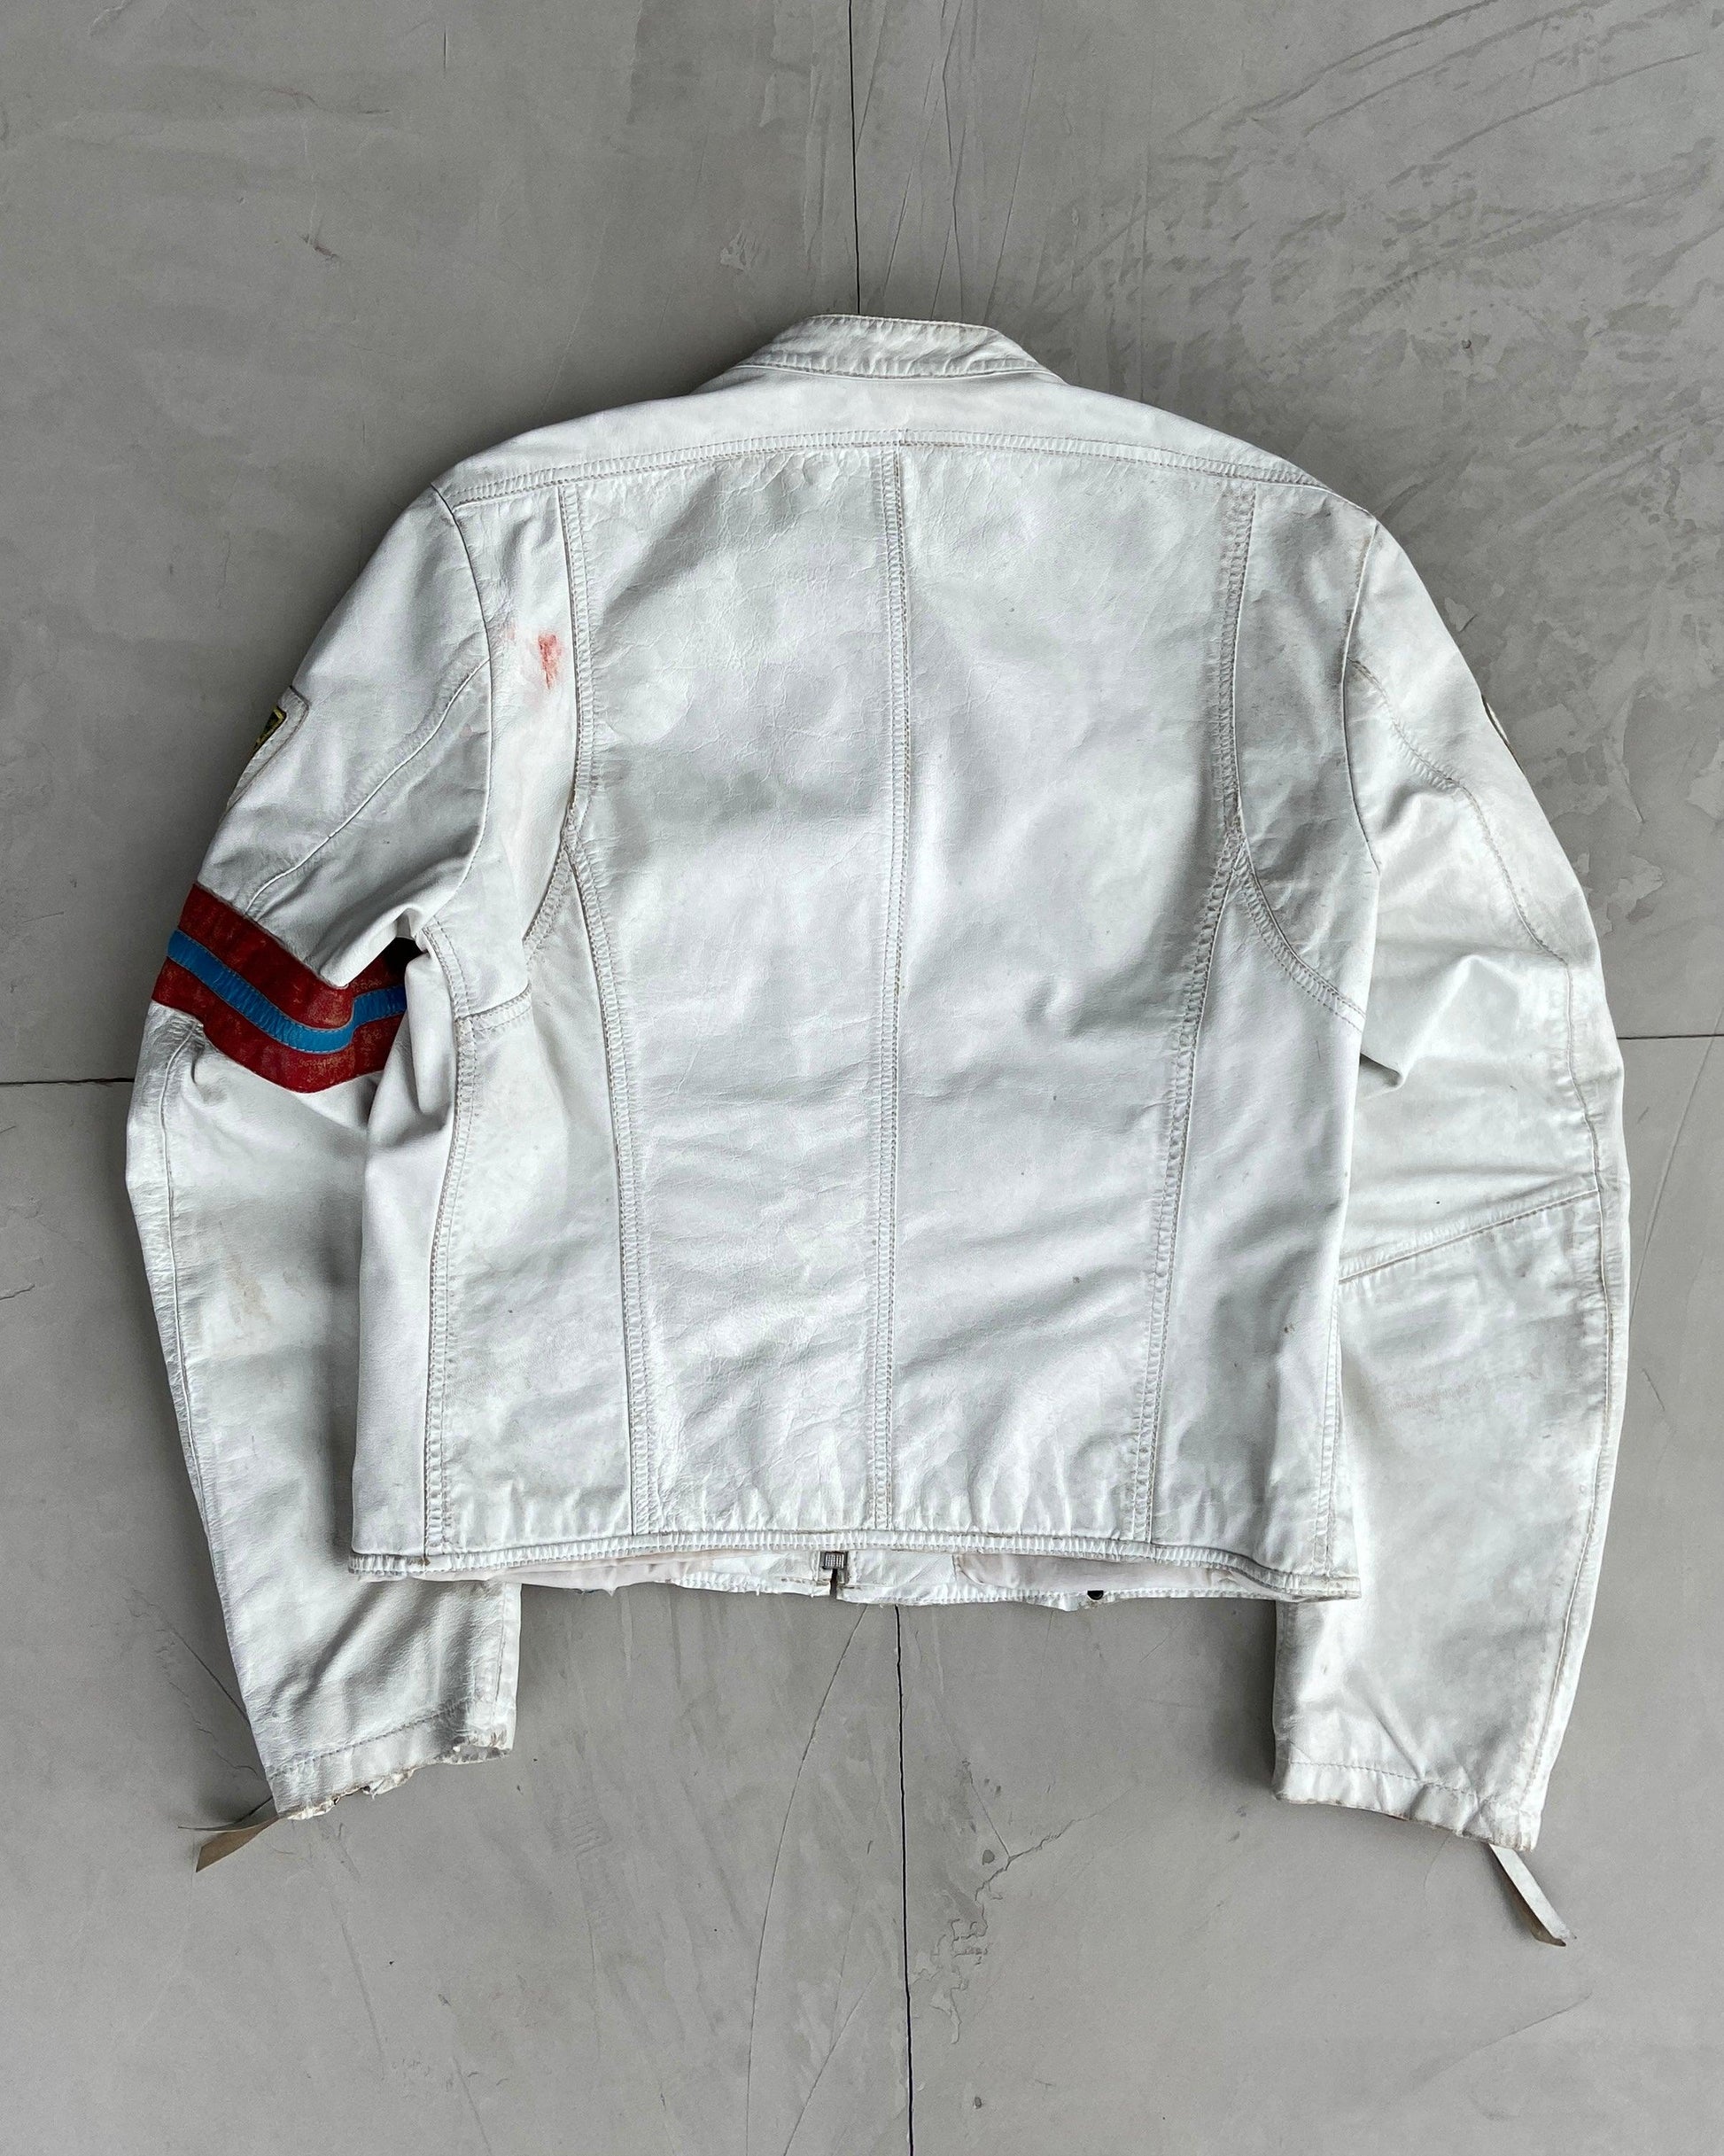 DIESEL 2000'S WHITE LEATHER RACER JACKET - M - Known Source